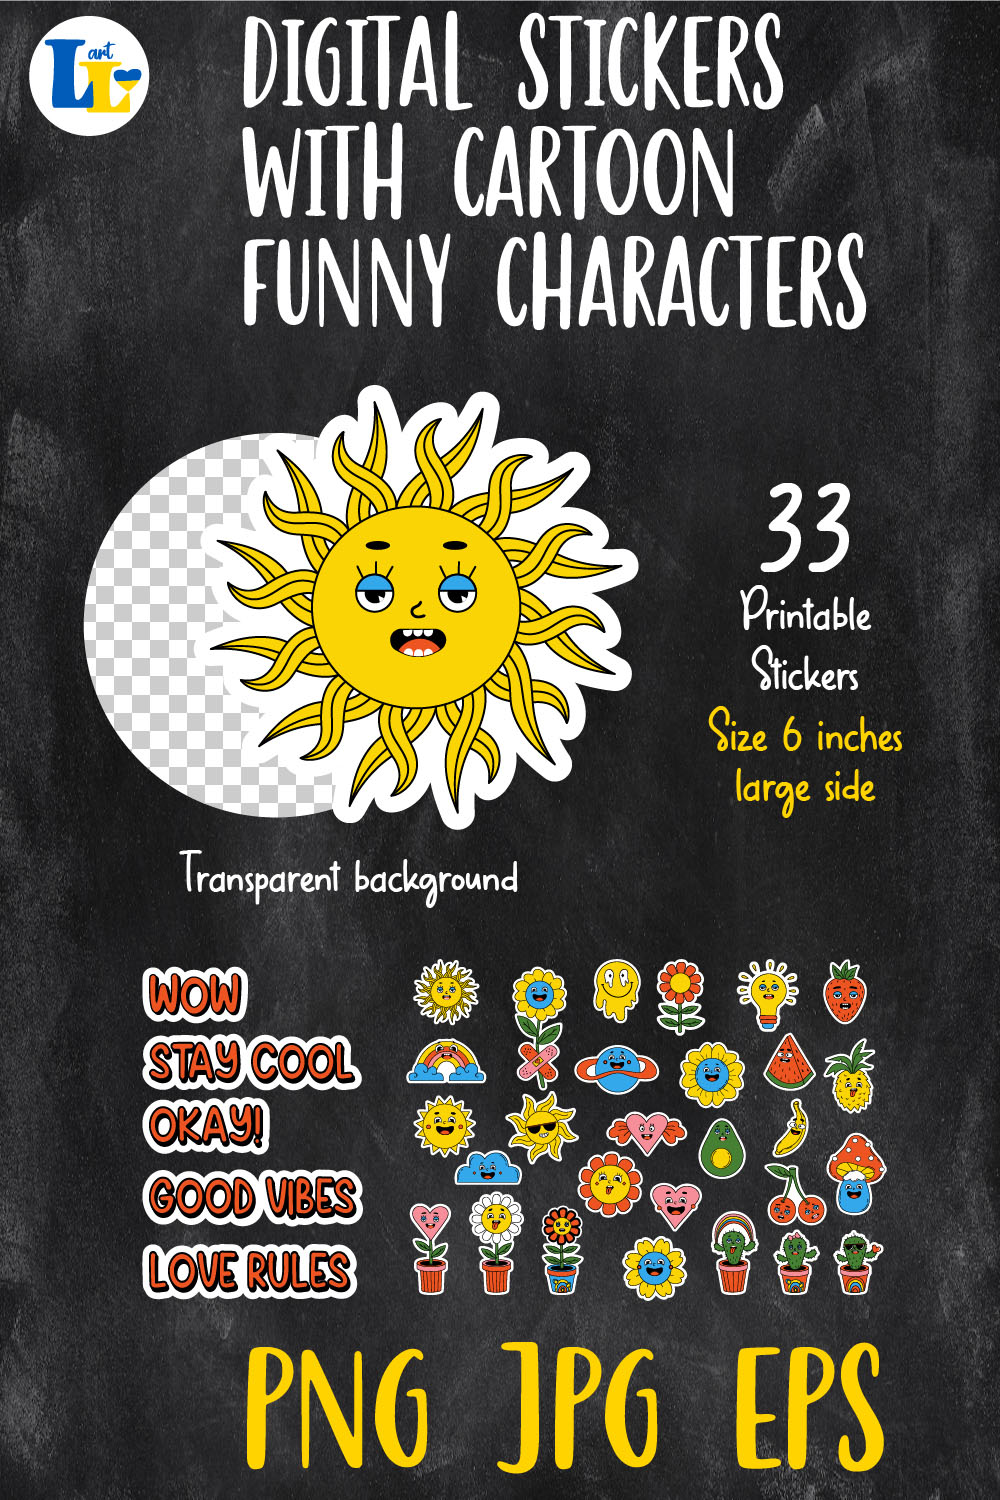 Funny Characters With Faces Bundle Pinterest Image.